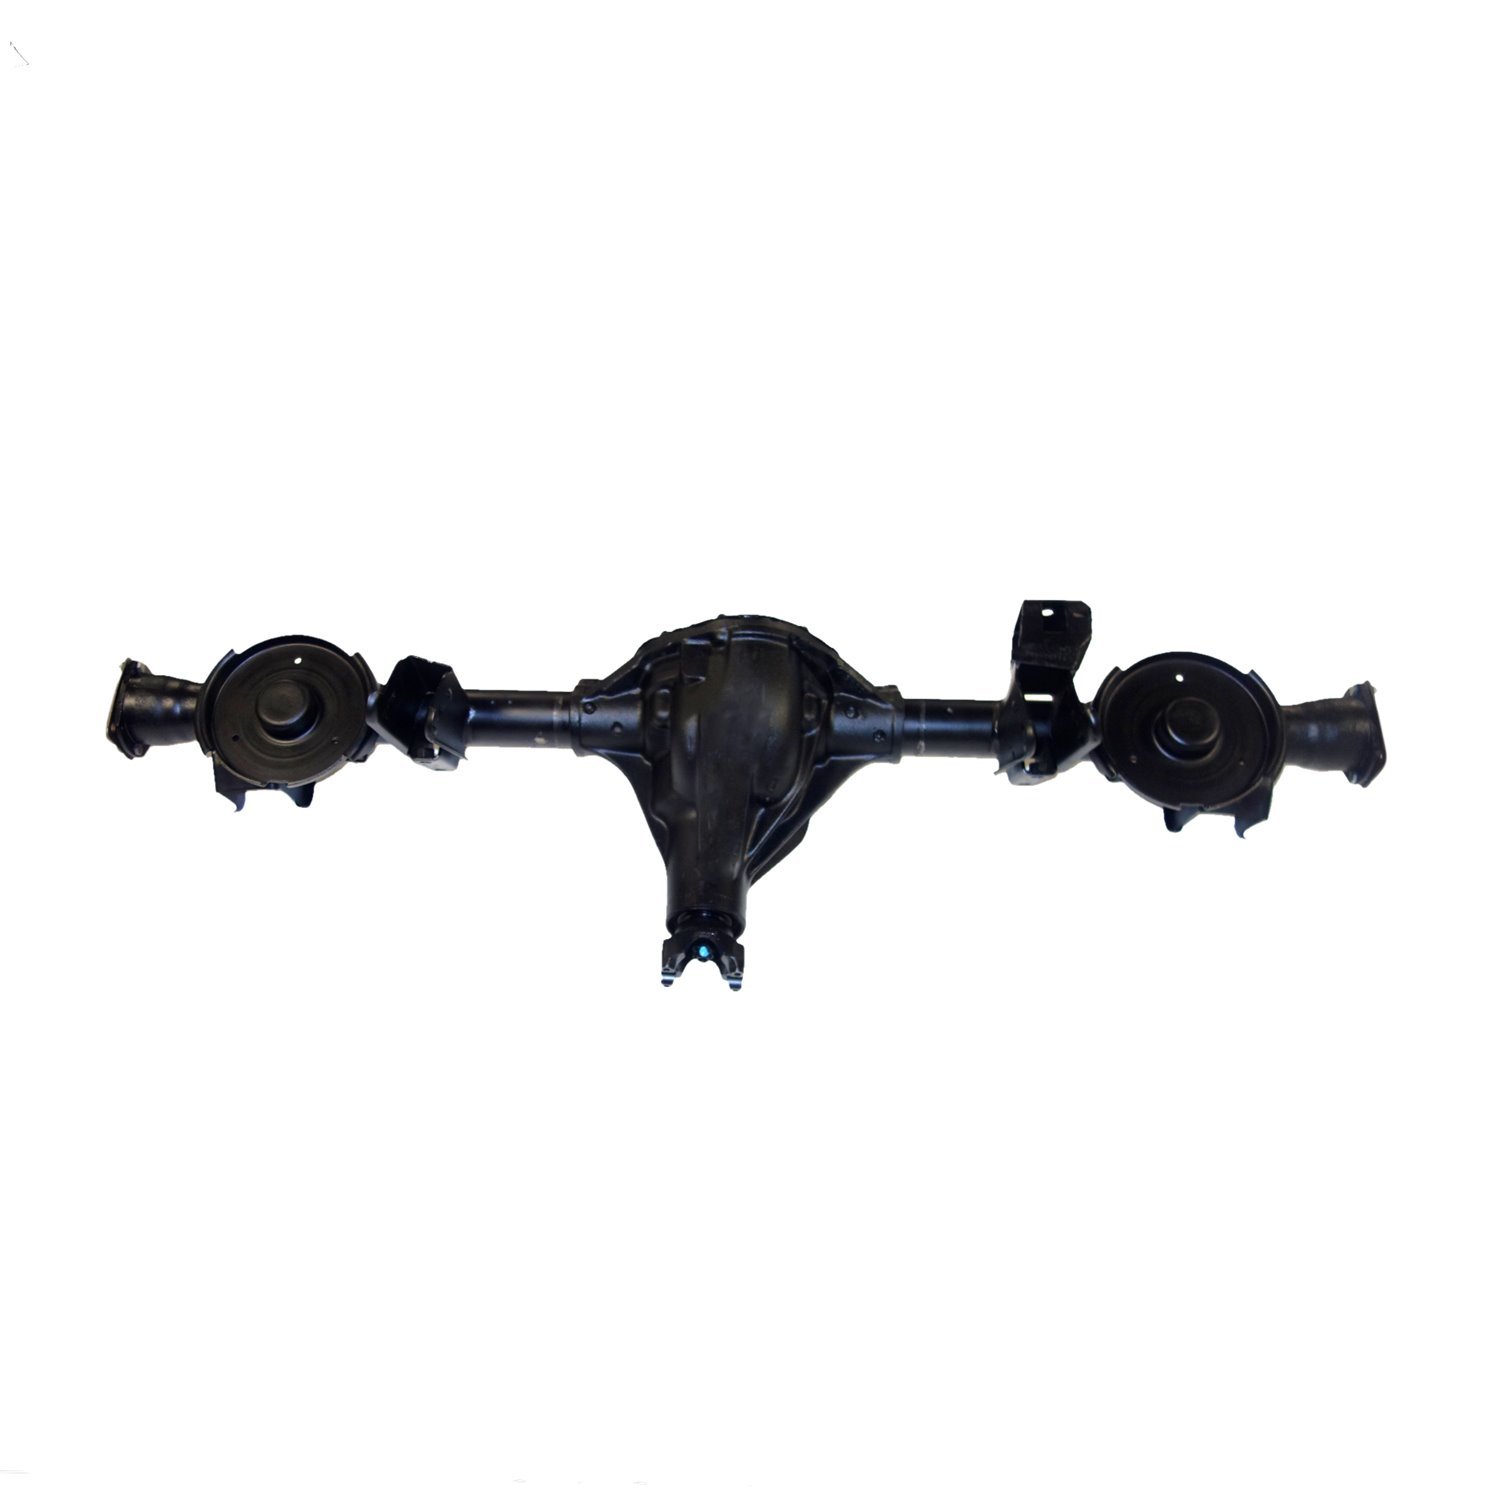 Remanufactured Complete Axle Assembly for Dana 44 97-99 Jeep Wrangler 3.07 Ratio